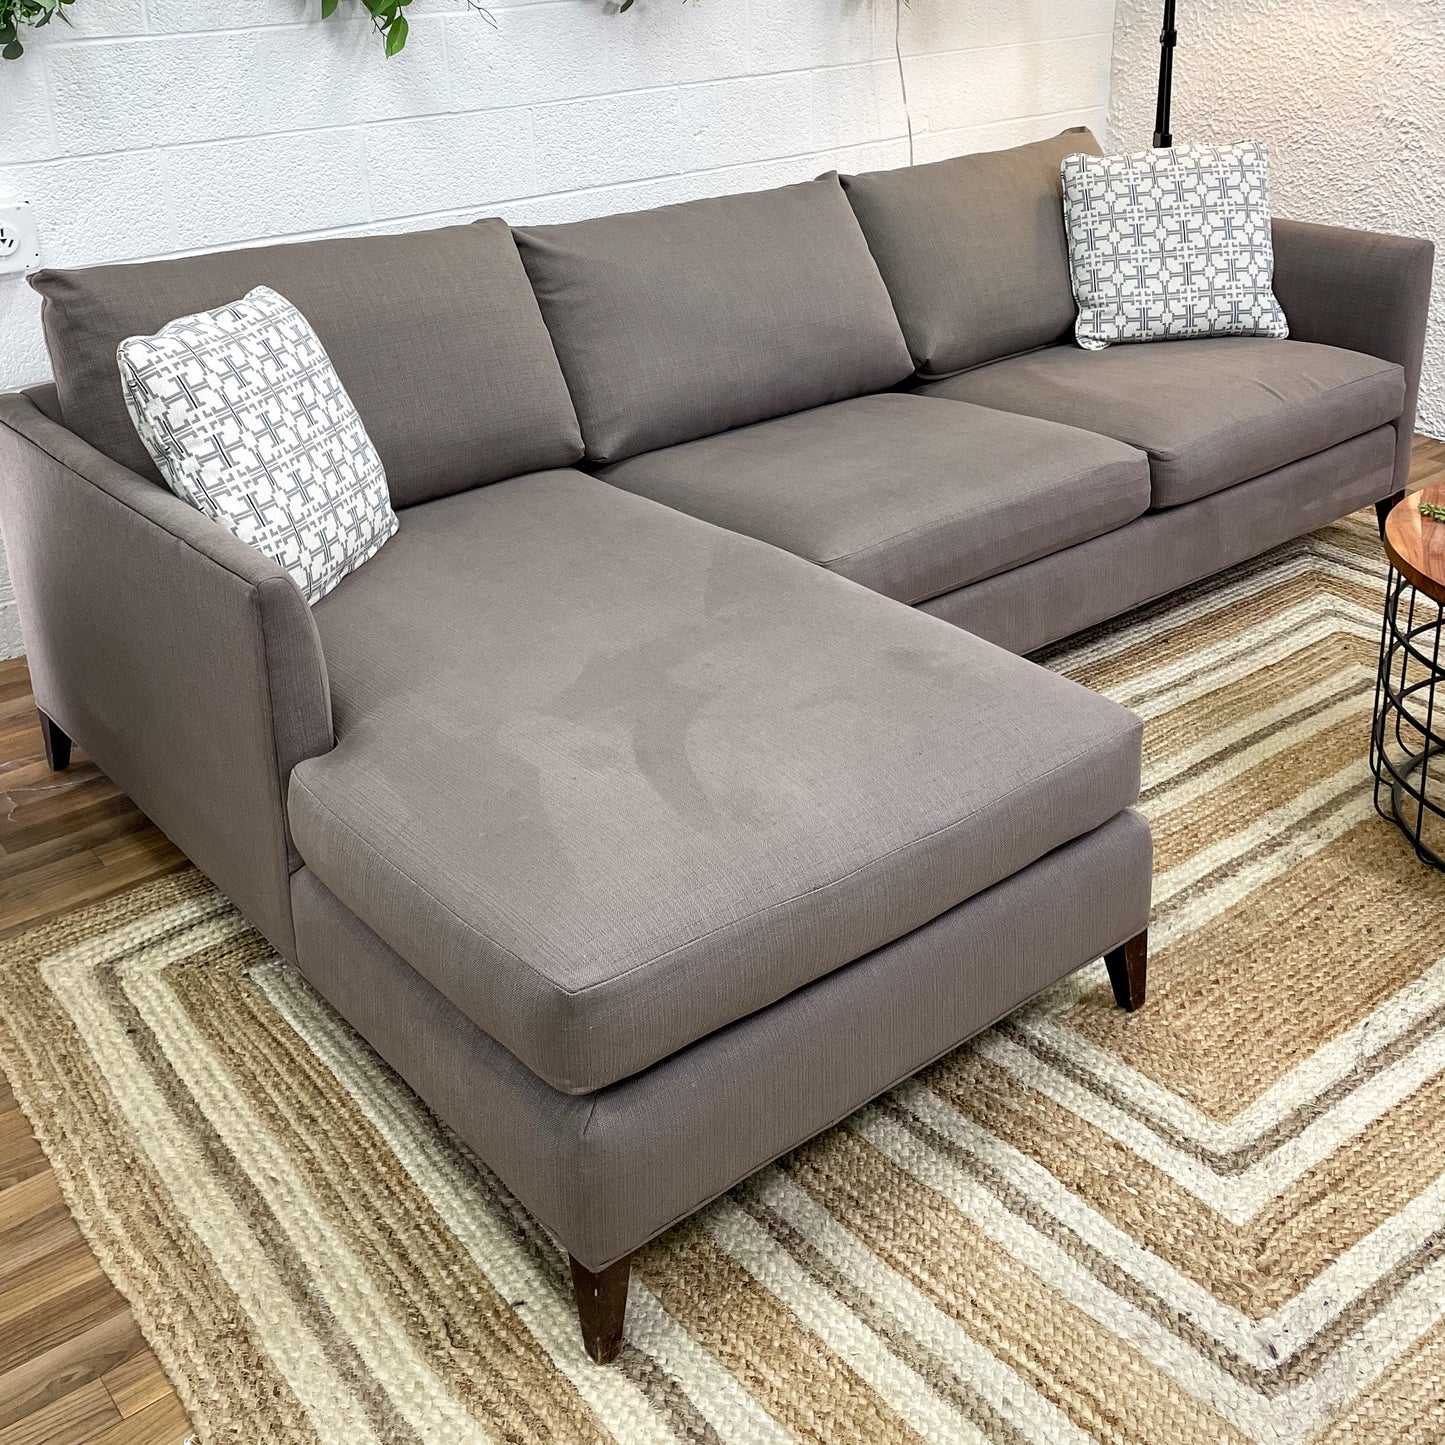 Crate & Barrel 2pc Sectional w/Chaise